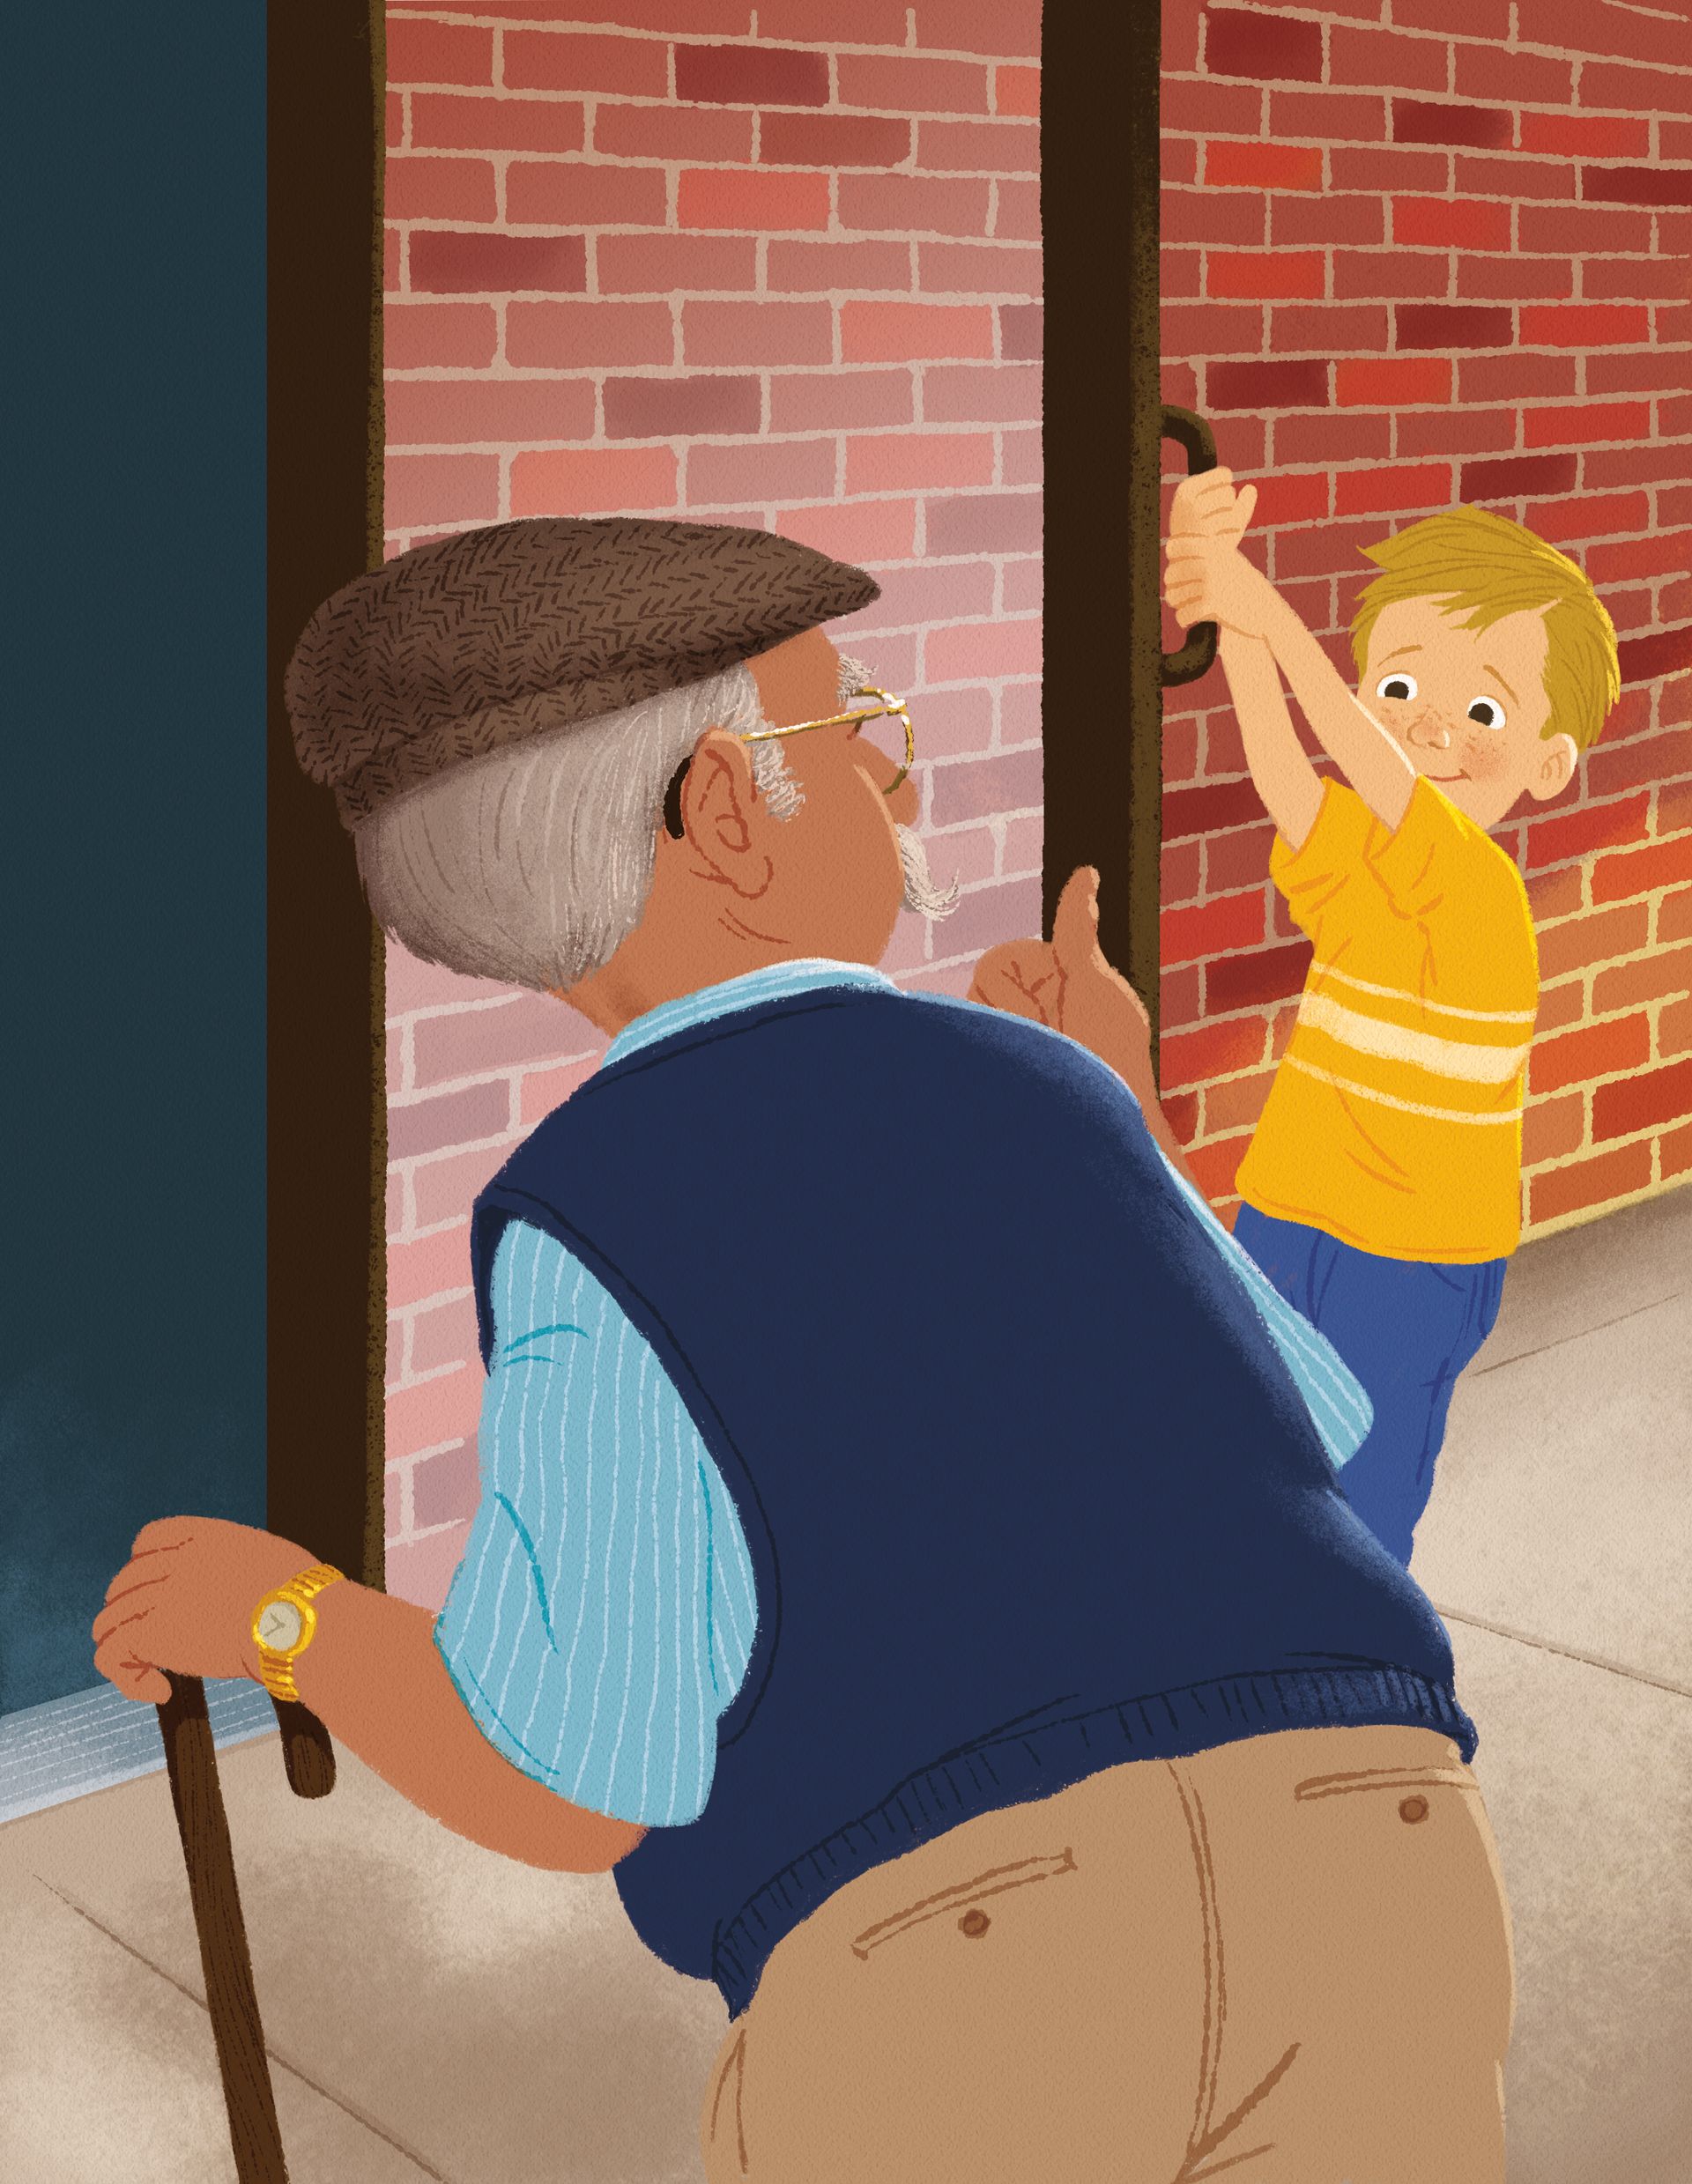 A little boy holds open a door for an elderly man, who is walking with a cane.